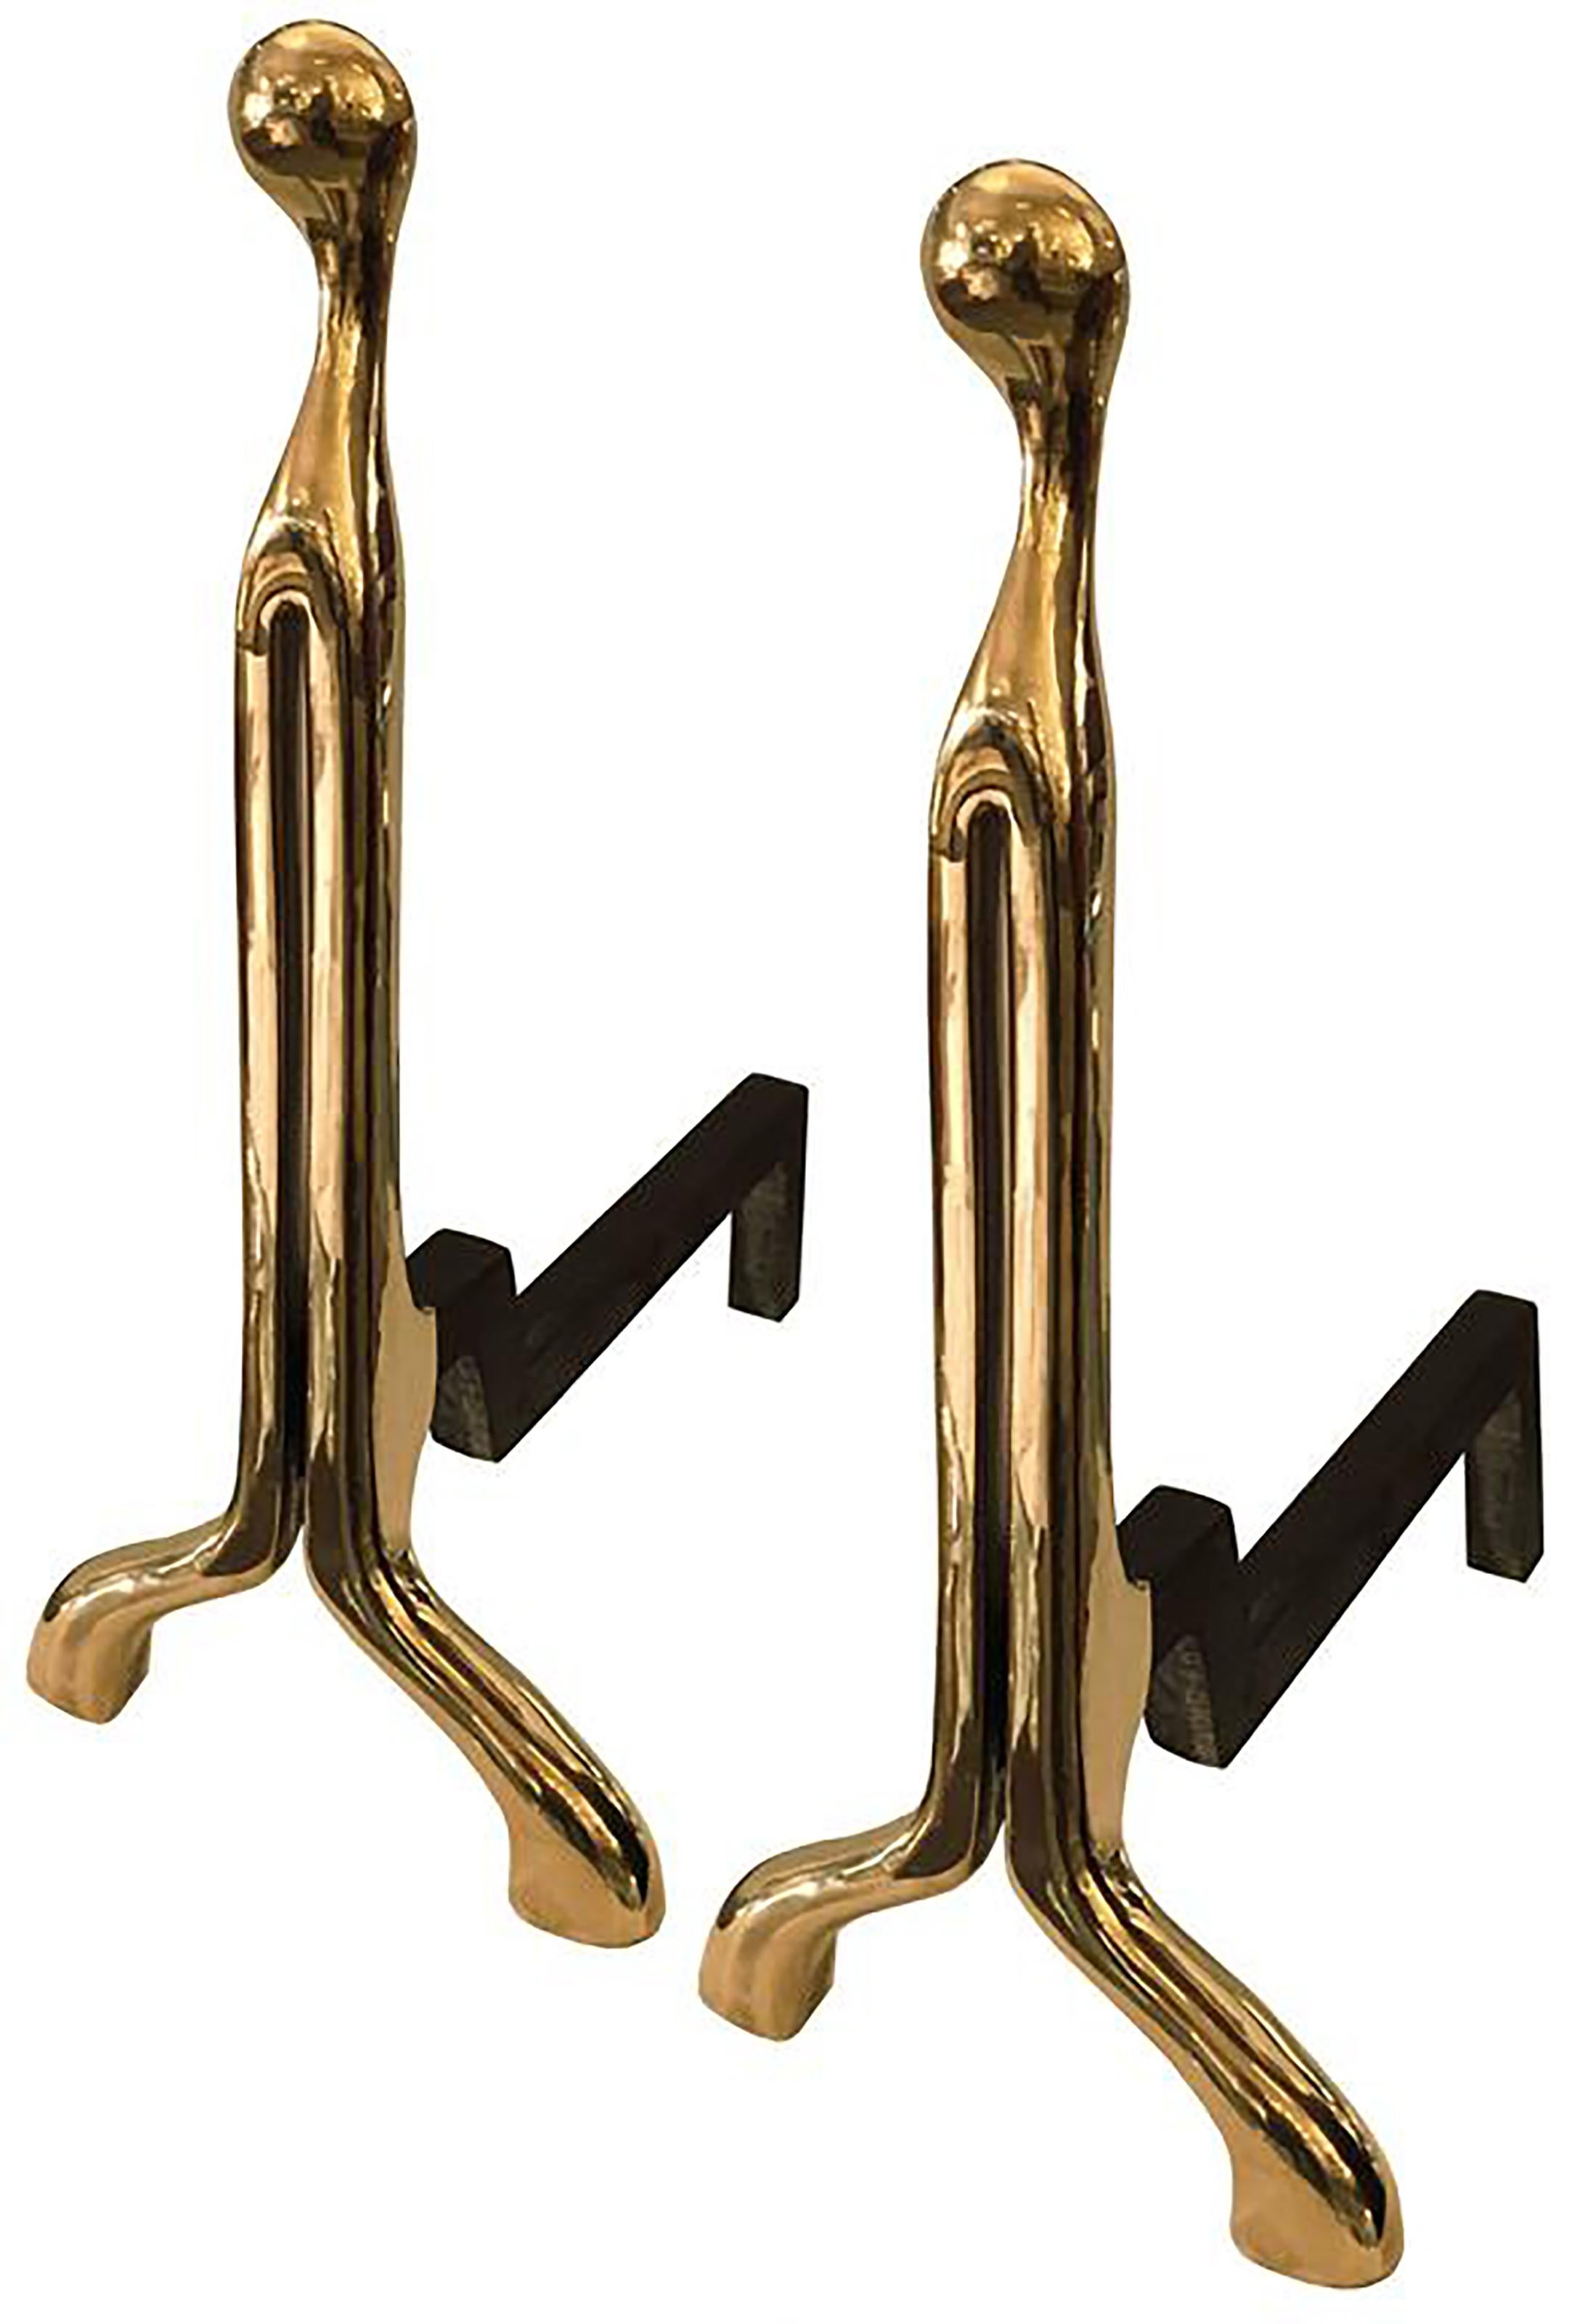 Pair of Caliber Cast Bronze Andirons by Nancy Ruben for Craig Van Den Brulle In Excellent Condition For Sale In New York, NY